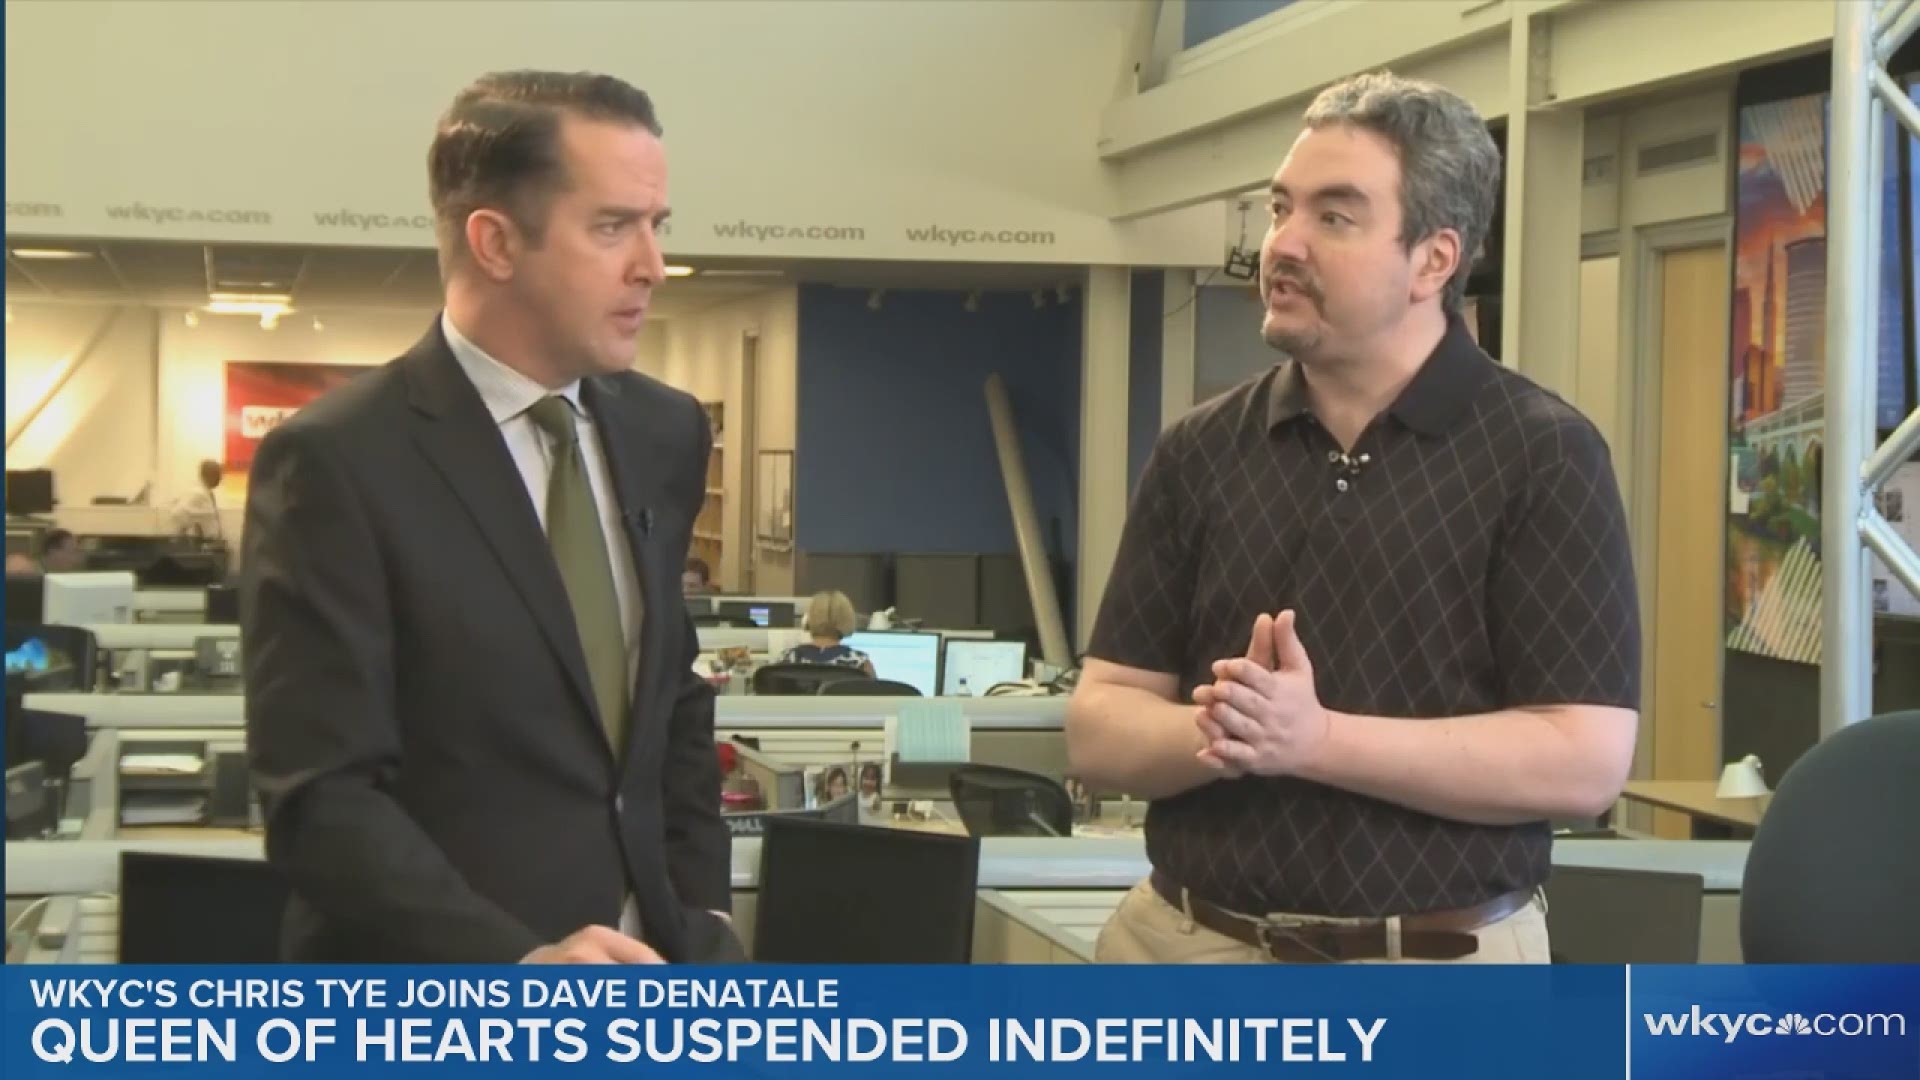 Chris Tye and Dave DeNatale discuss suspension of Queen of Hearts at Grayton Road Tavern